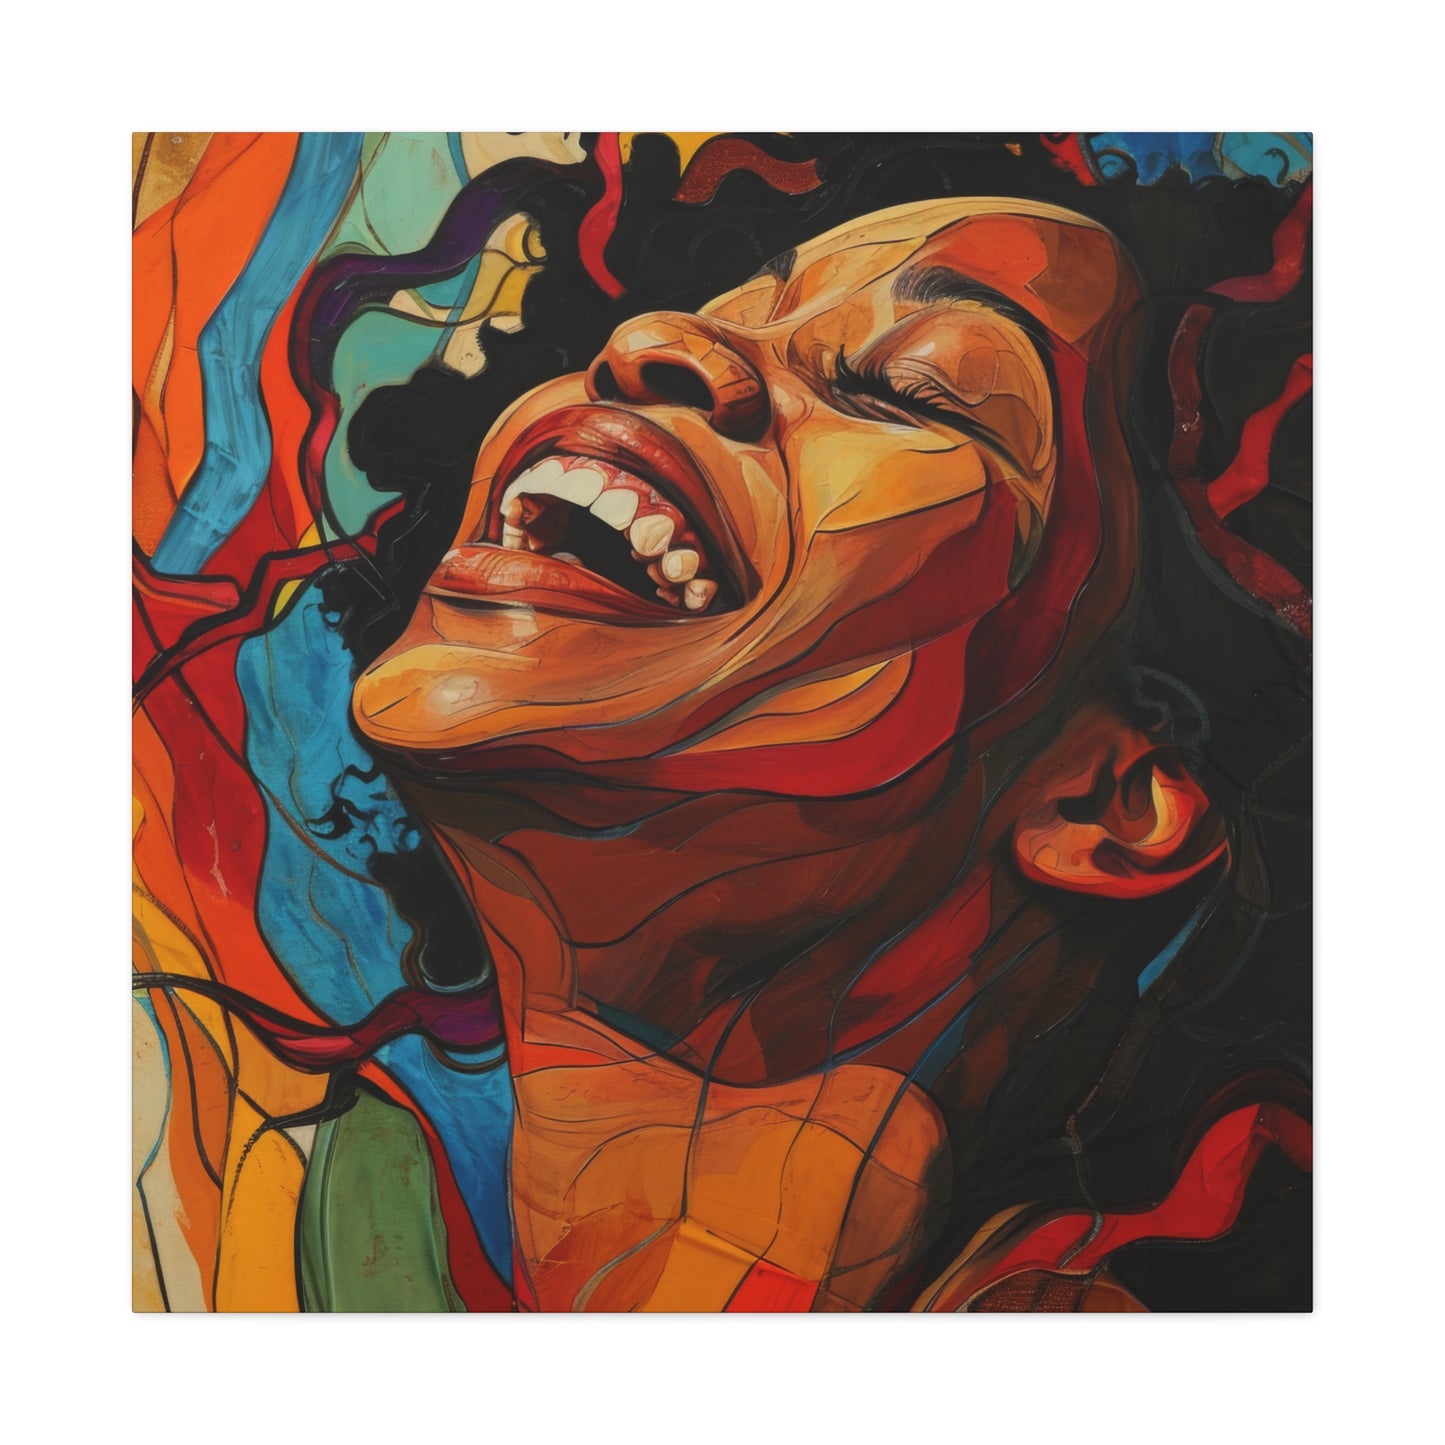 Joyful abstract portrait with a woman laughing, her head thrown back, amidst a swirl of vibrant, flowing colors, conveying a sense of pure bliss | EbMerized Creations